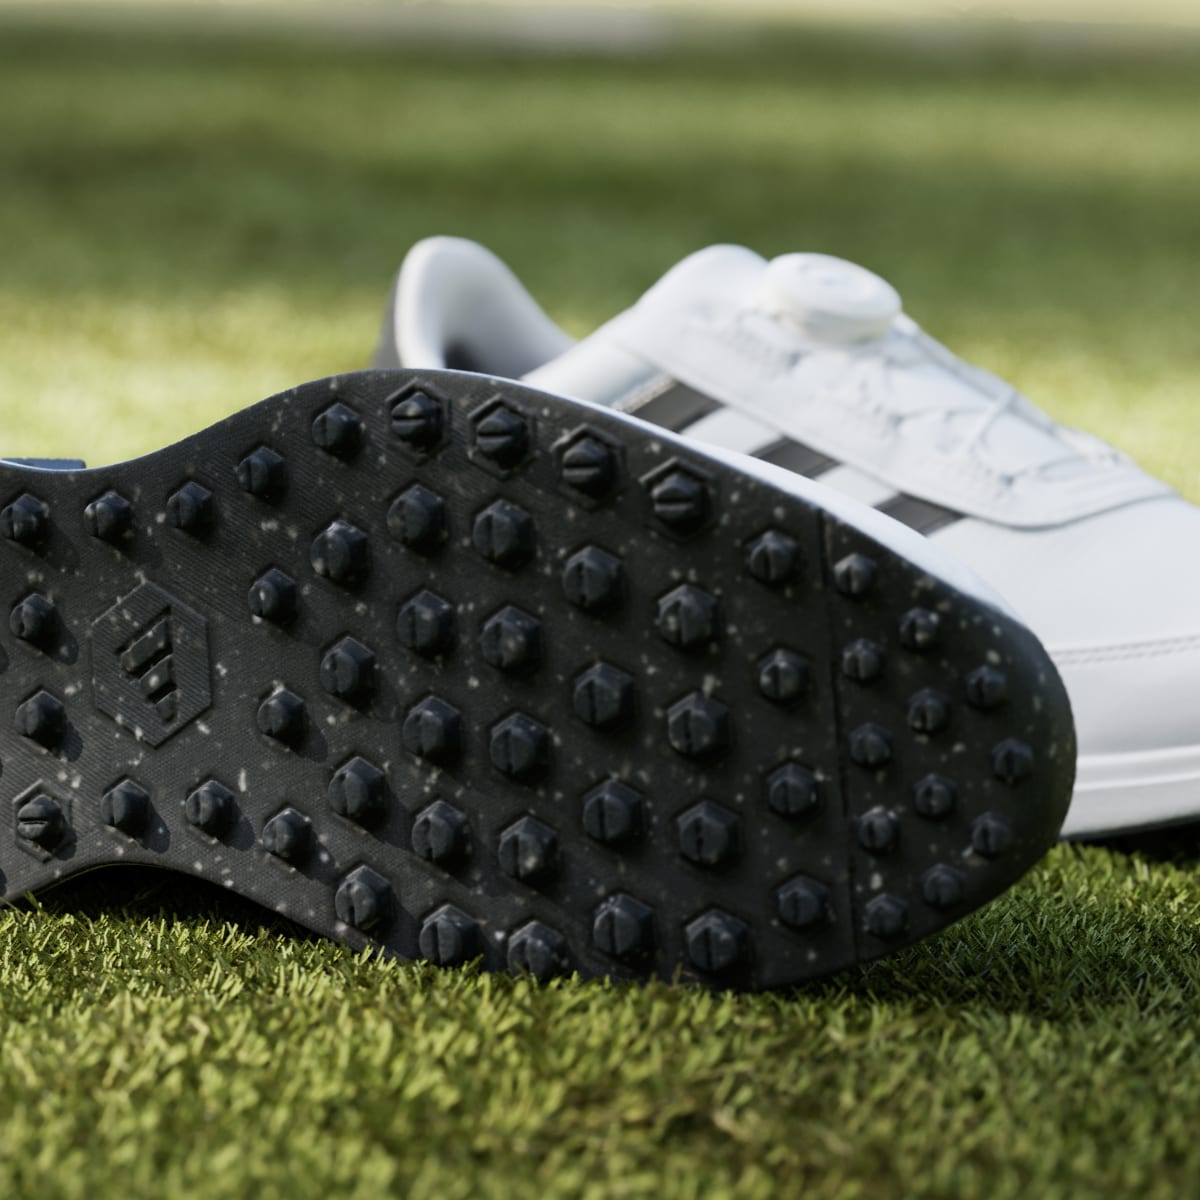 Adidas S2G Spikeless BOA 24 Wide Golf Shoes. 8